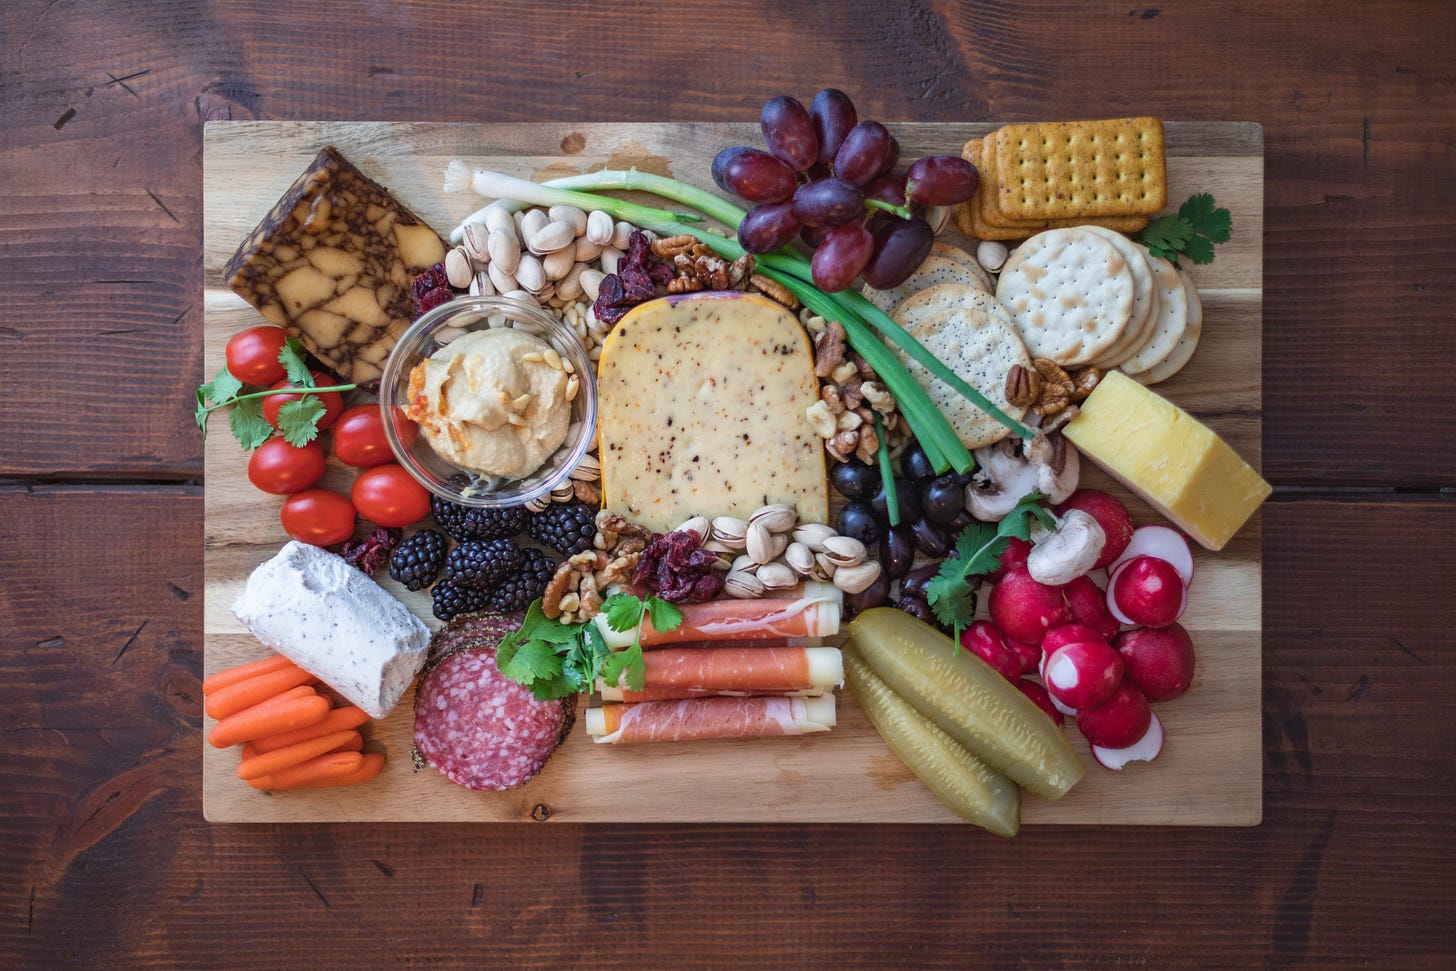 Photo of a charcuterie board with meat, cheese, and fruits